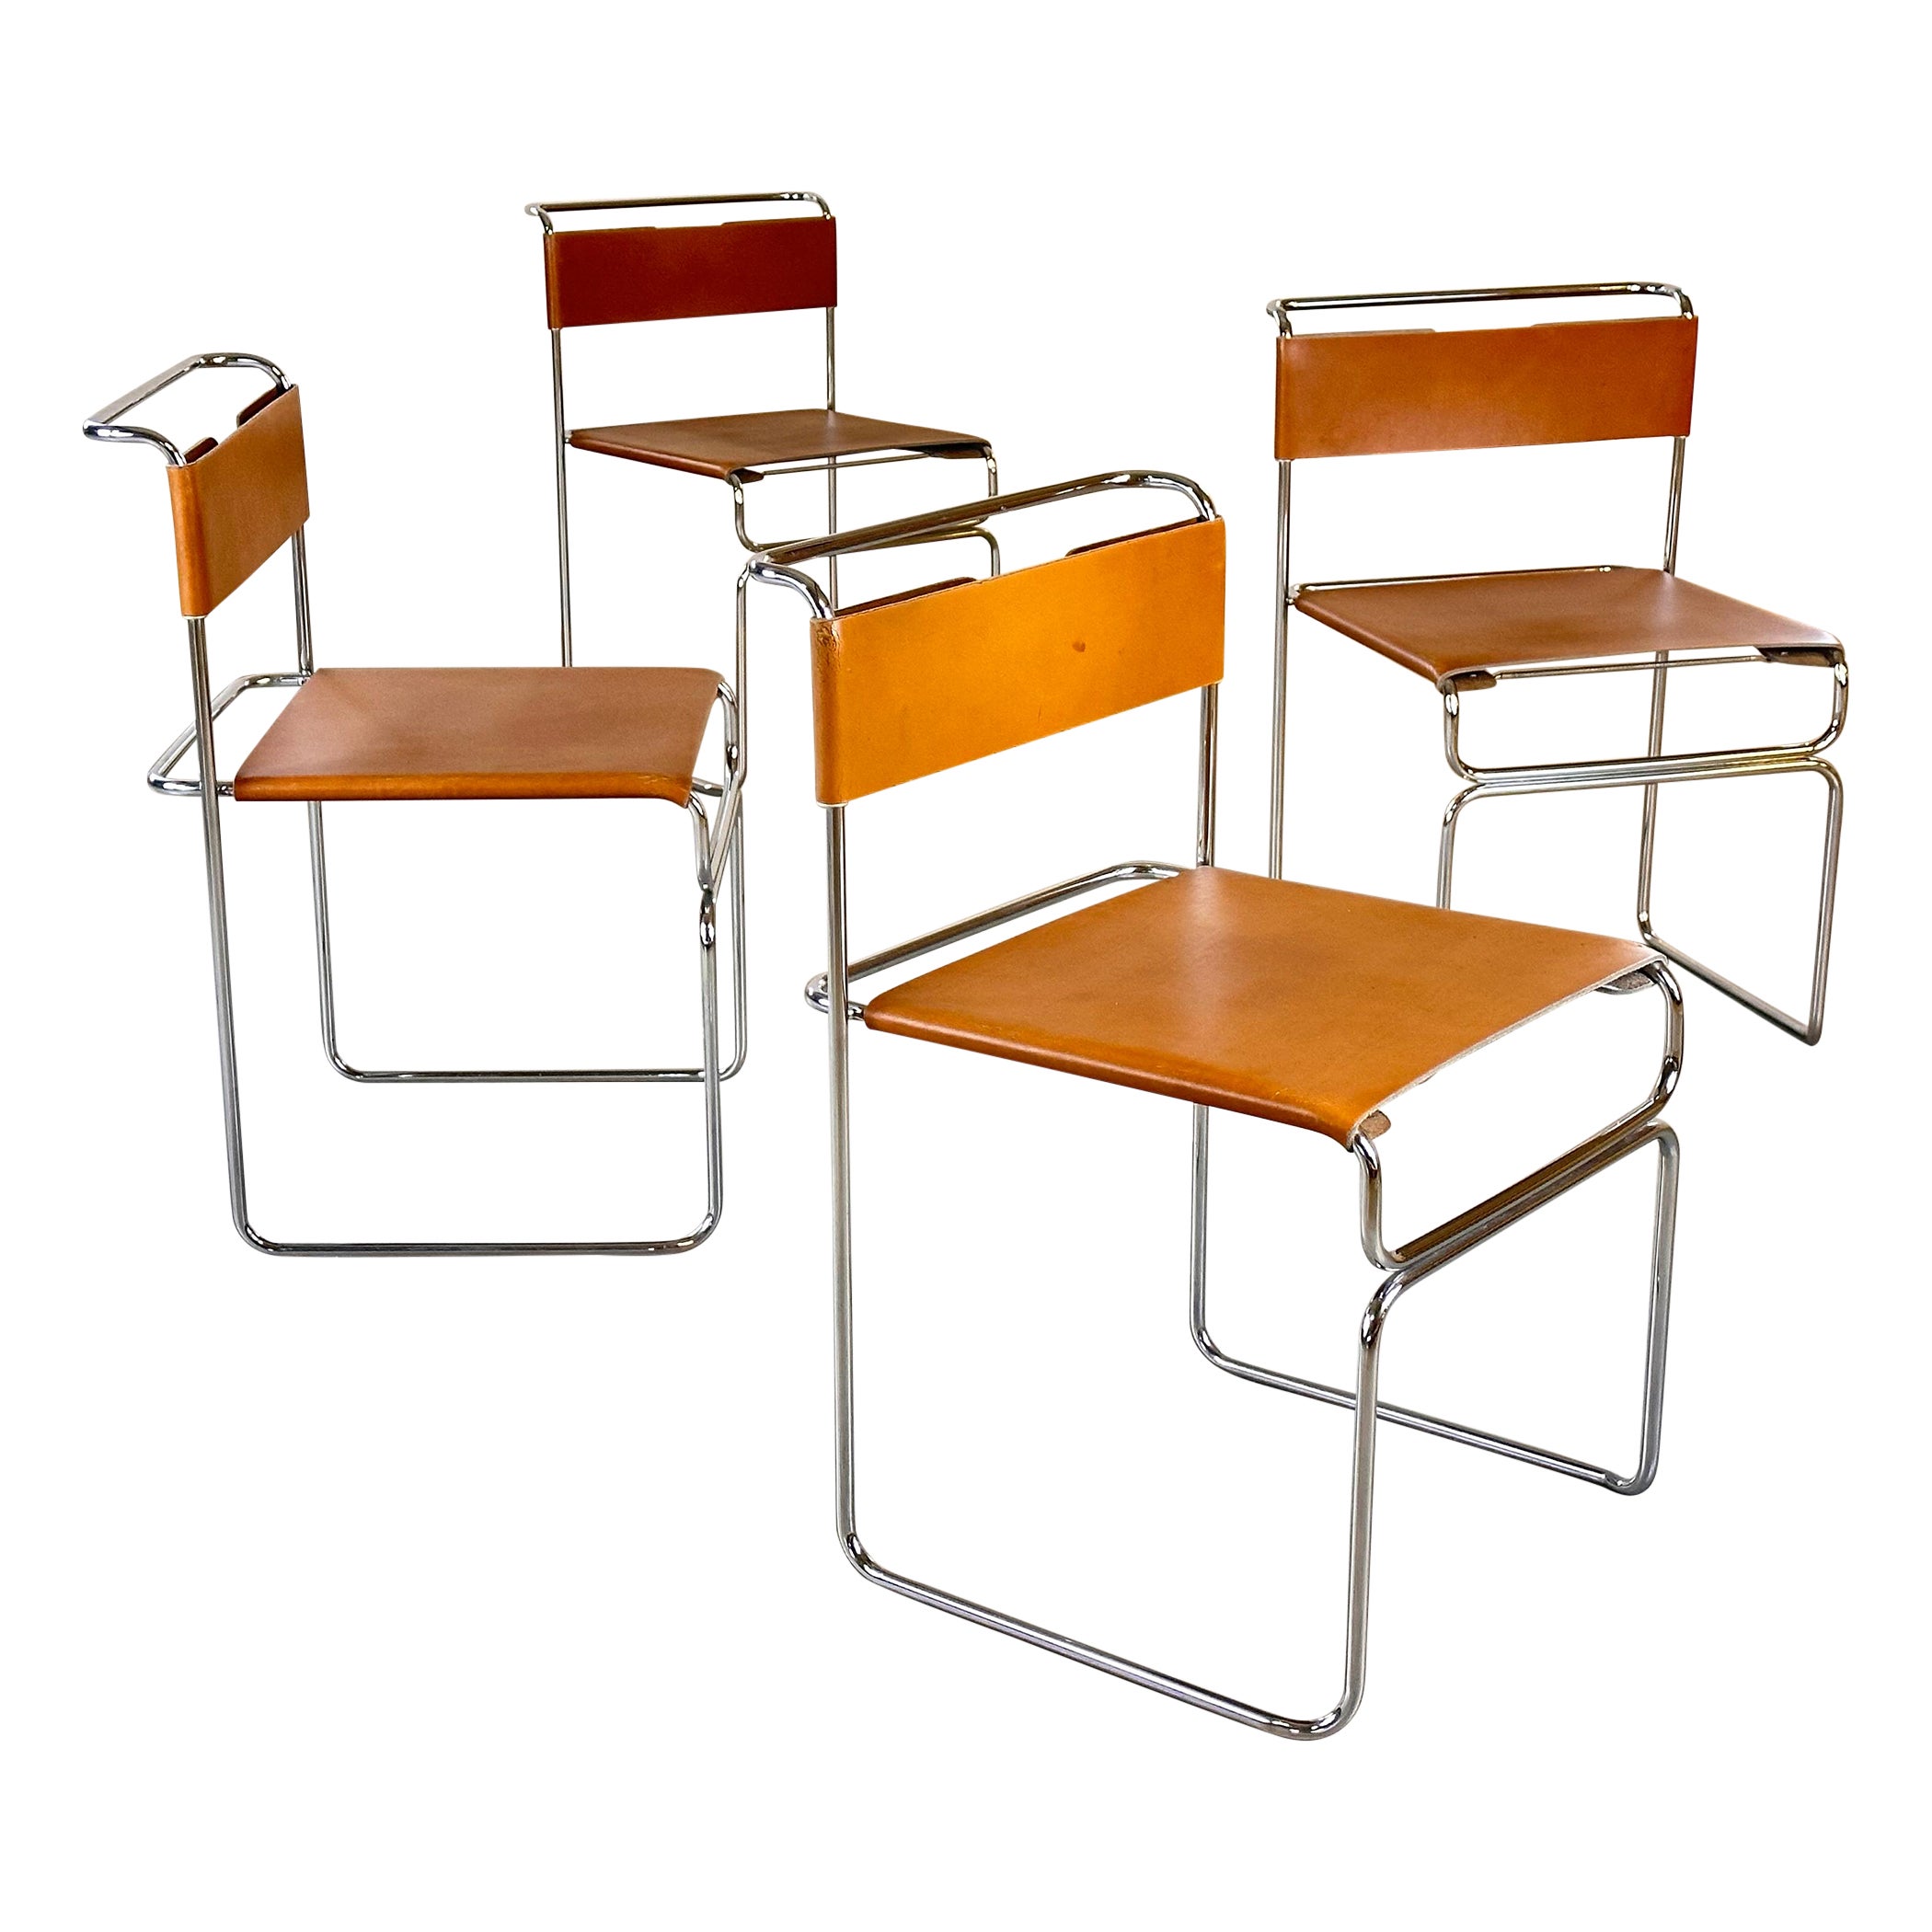 "Libellula" Chairs by Giovanni Carini for Planula in Cognac Leather, 1970s